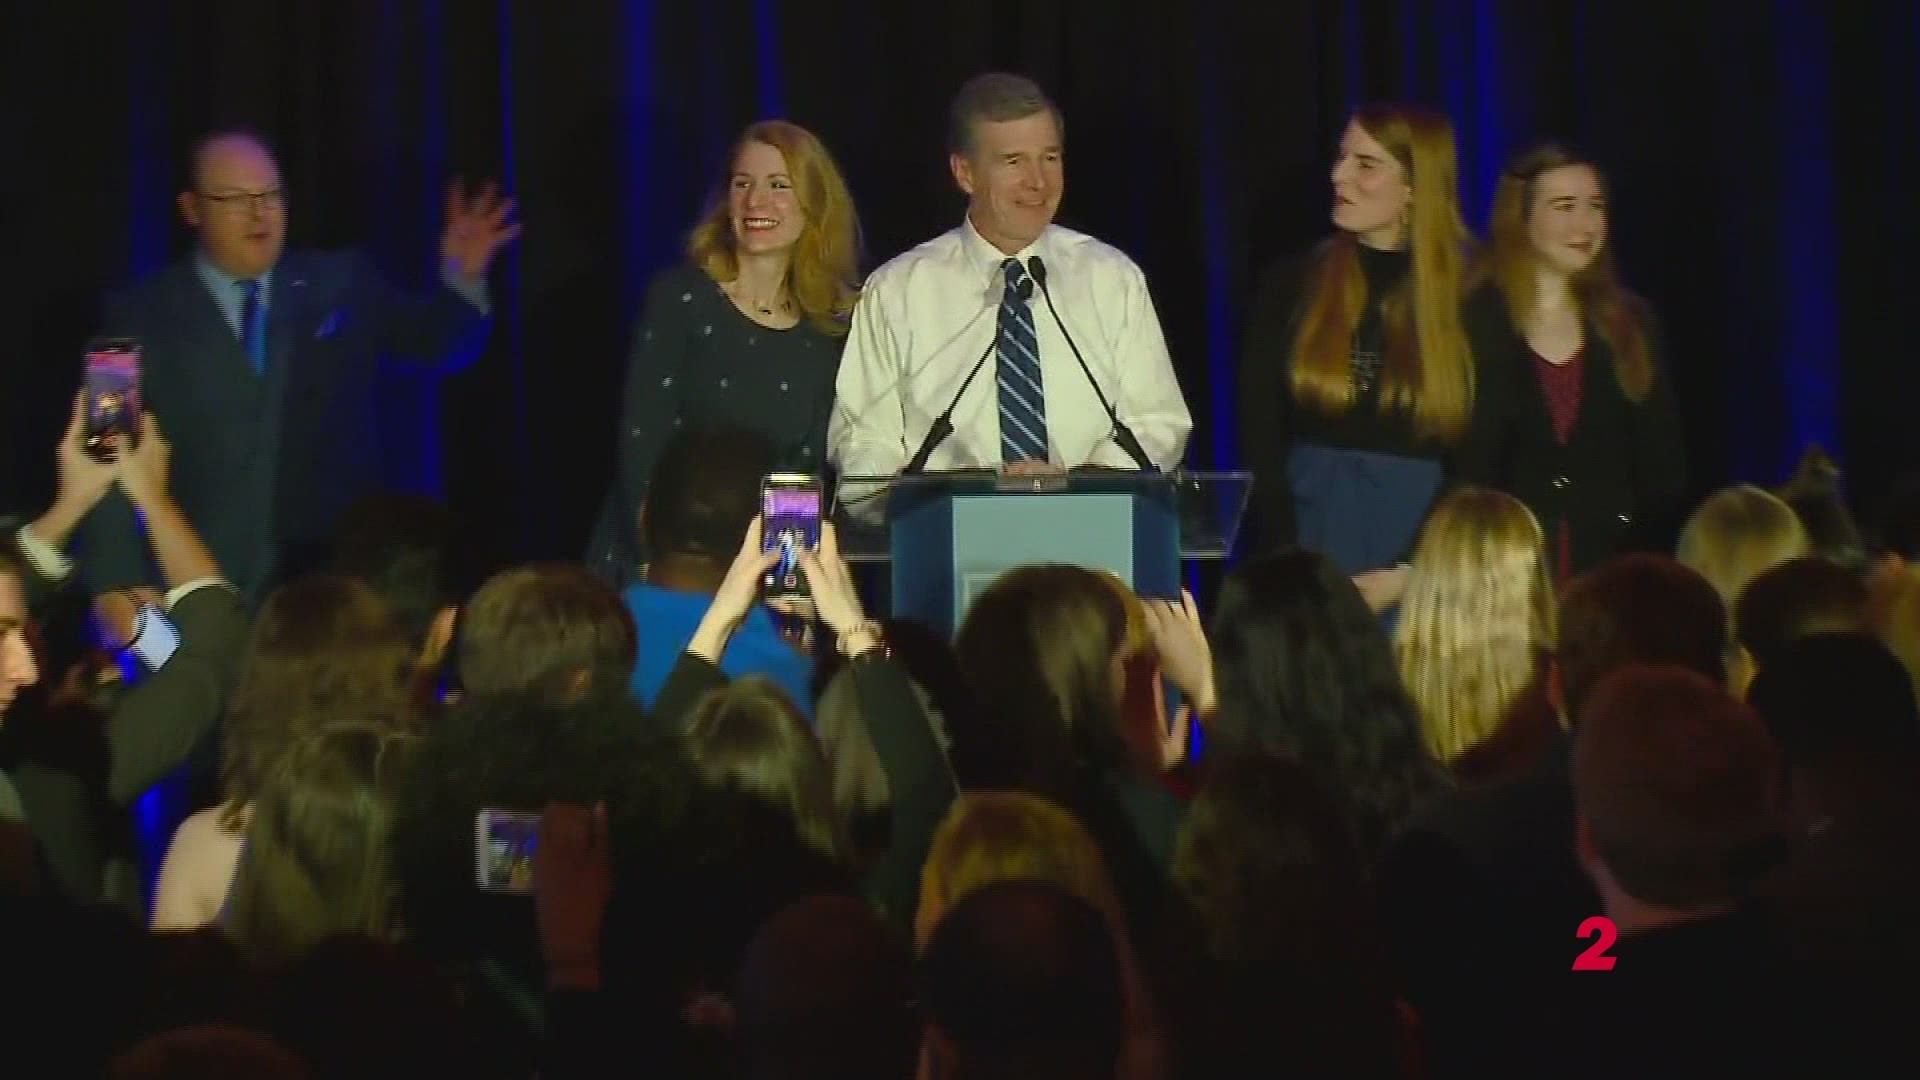 Democratic Gov. Roy Cooper of North Carolina has won his party's primary and will face Republican Lt. Gov. Dan Forest in November general election.